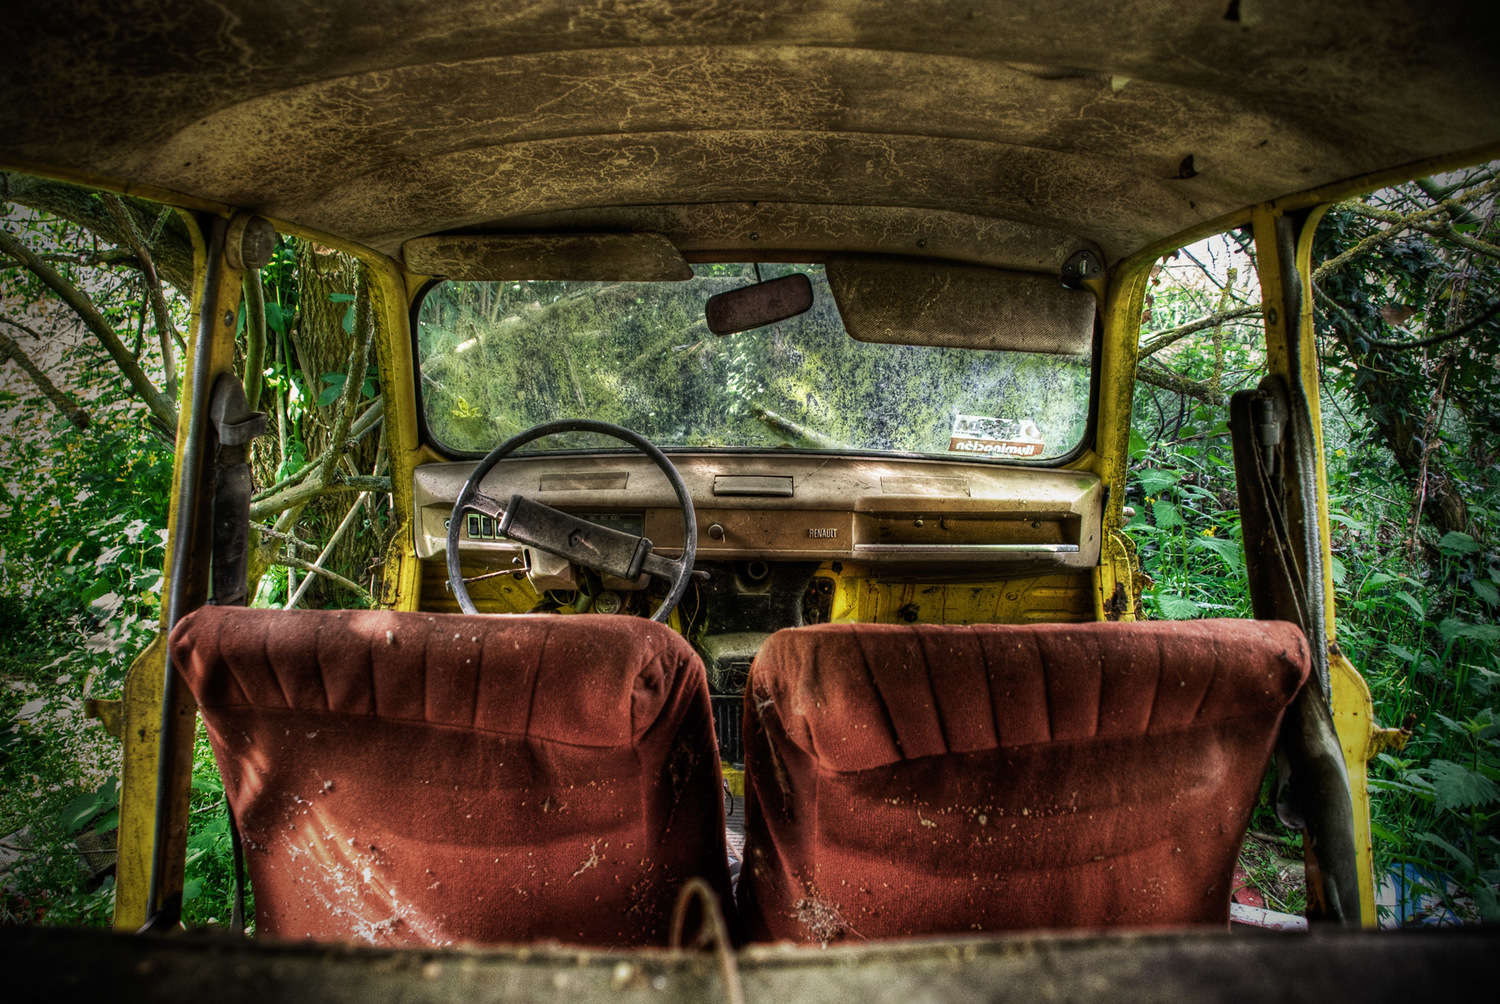 abadoned-car-in-the-forest.jpg